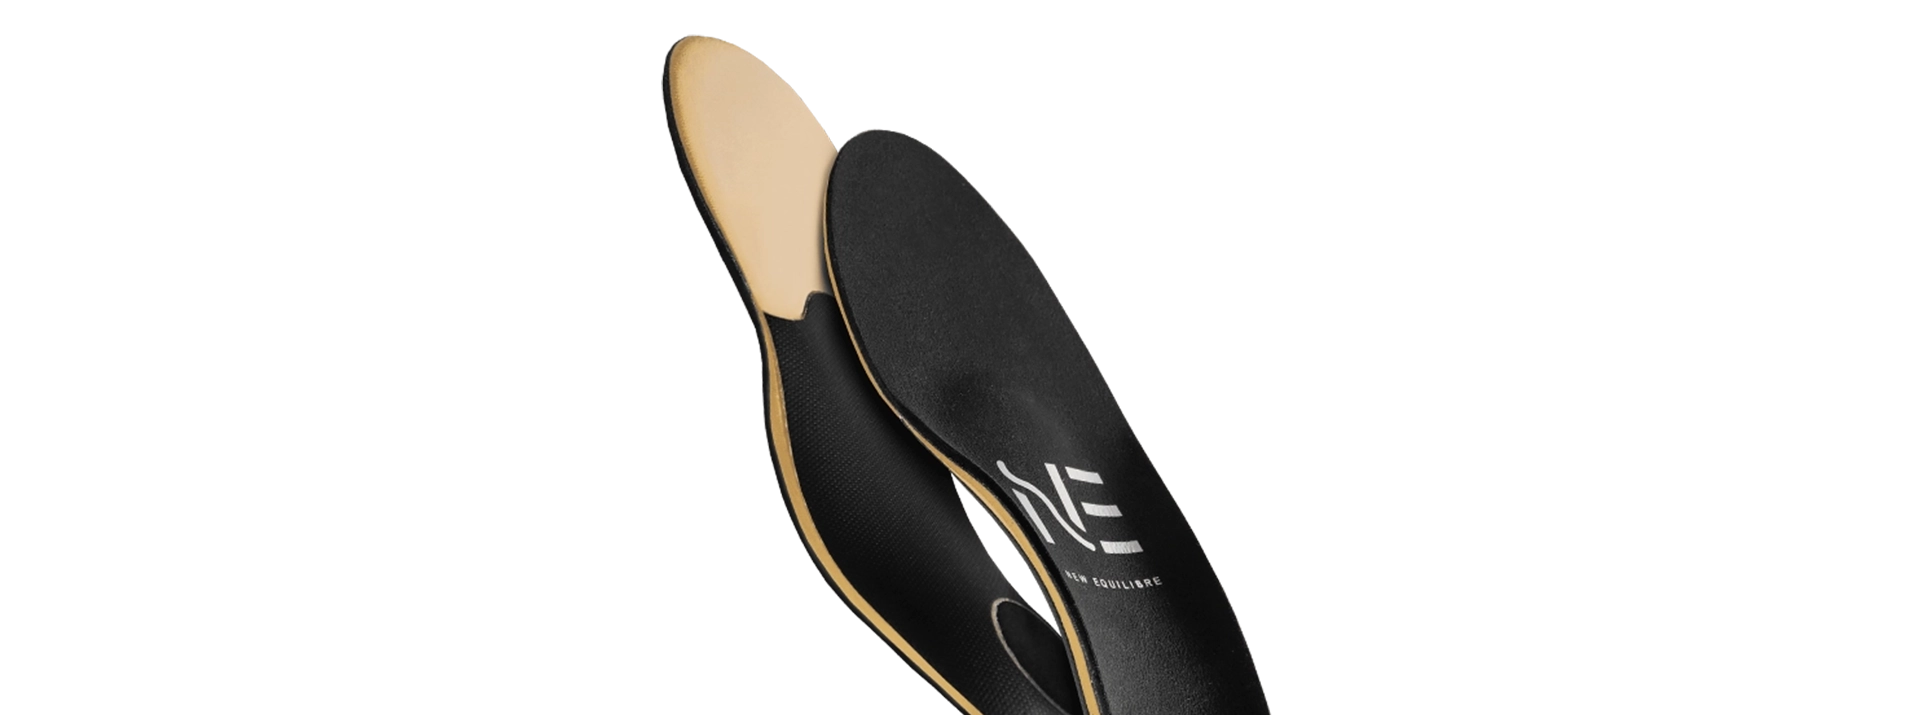 Comfort New Equilibre orthopedic insoles